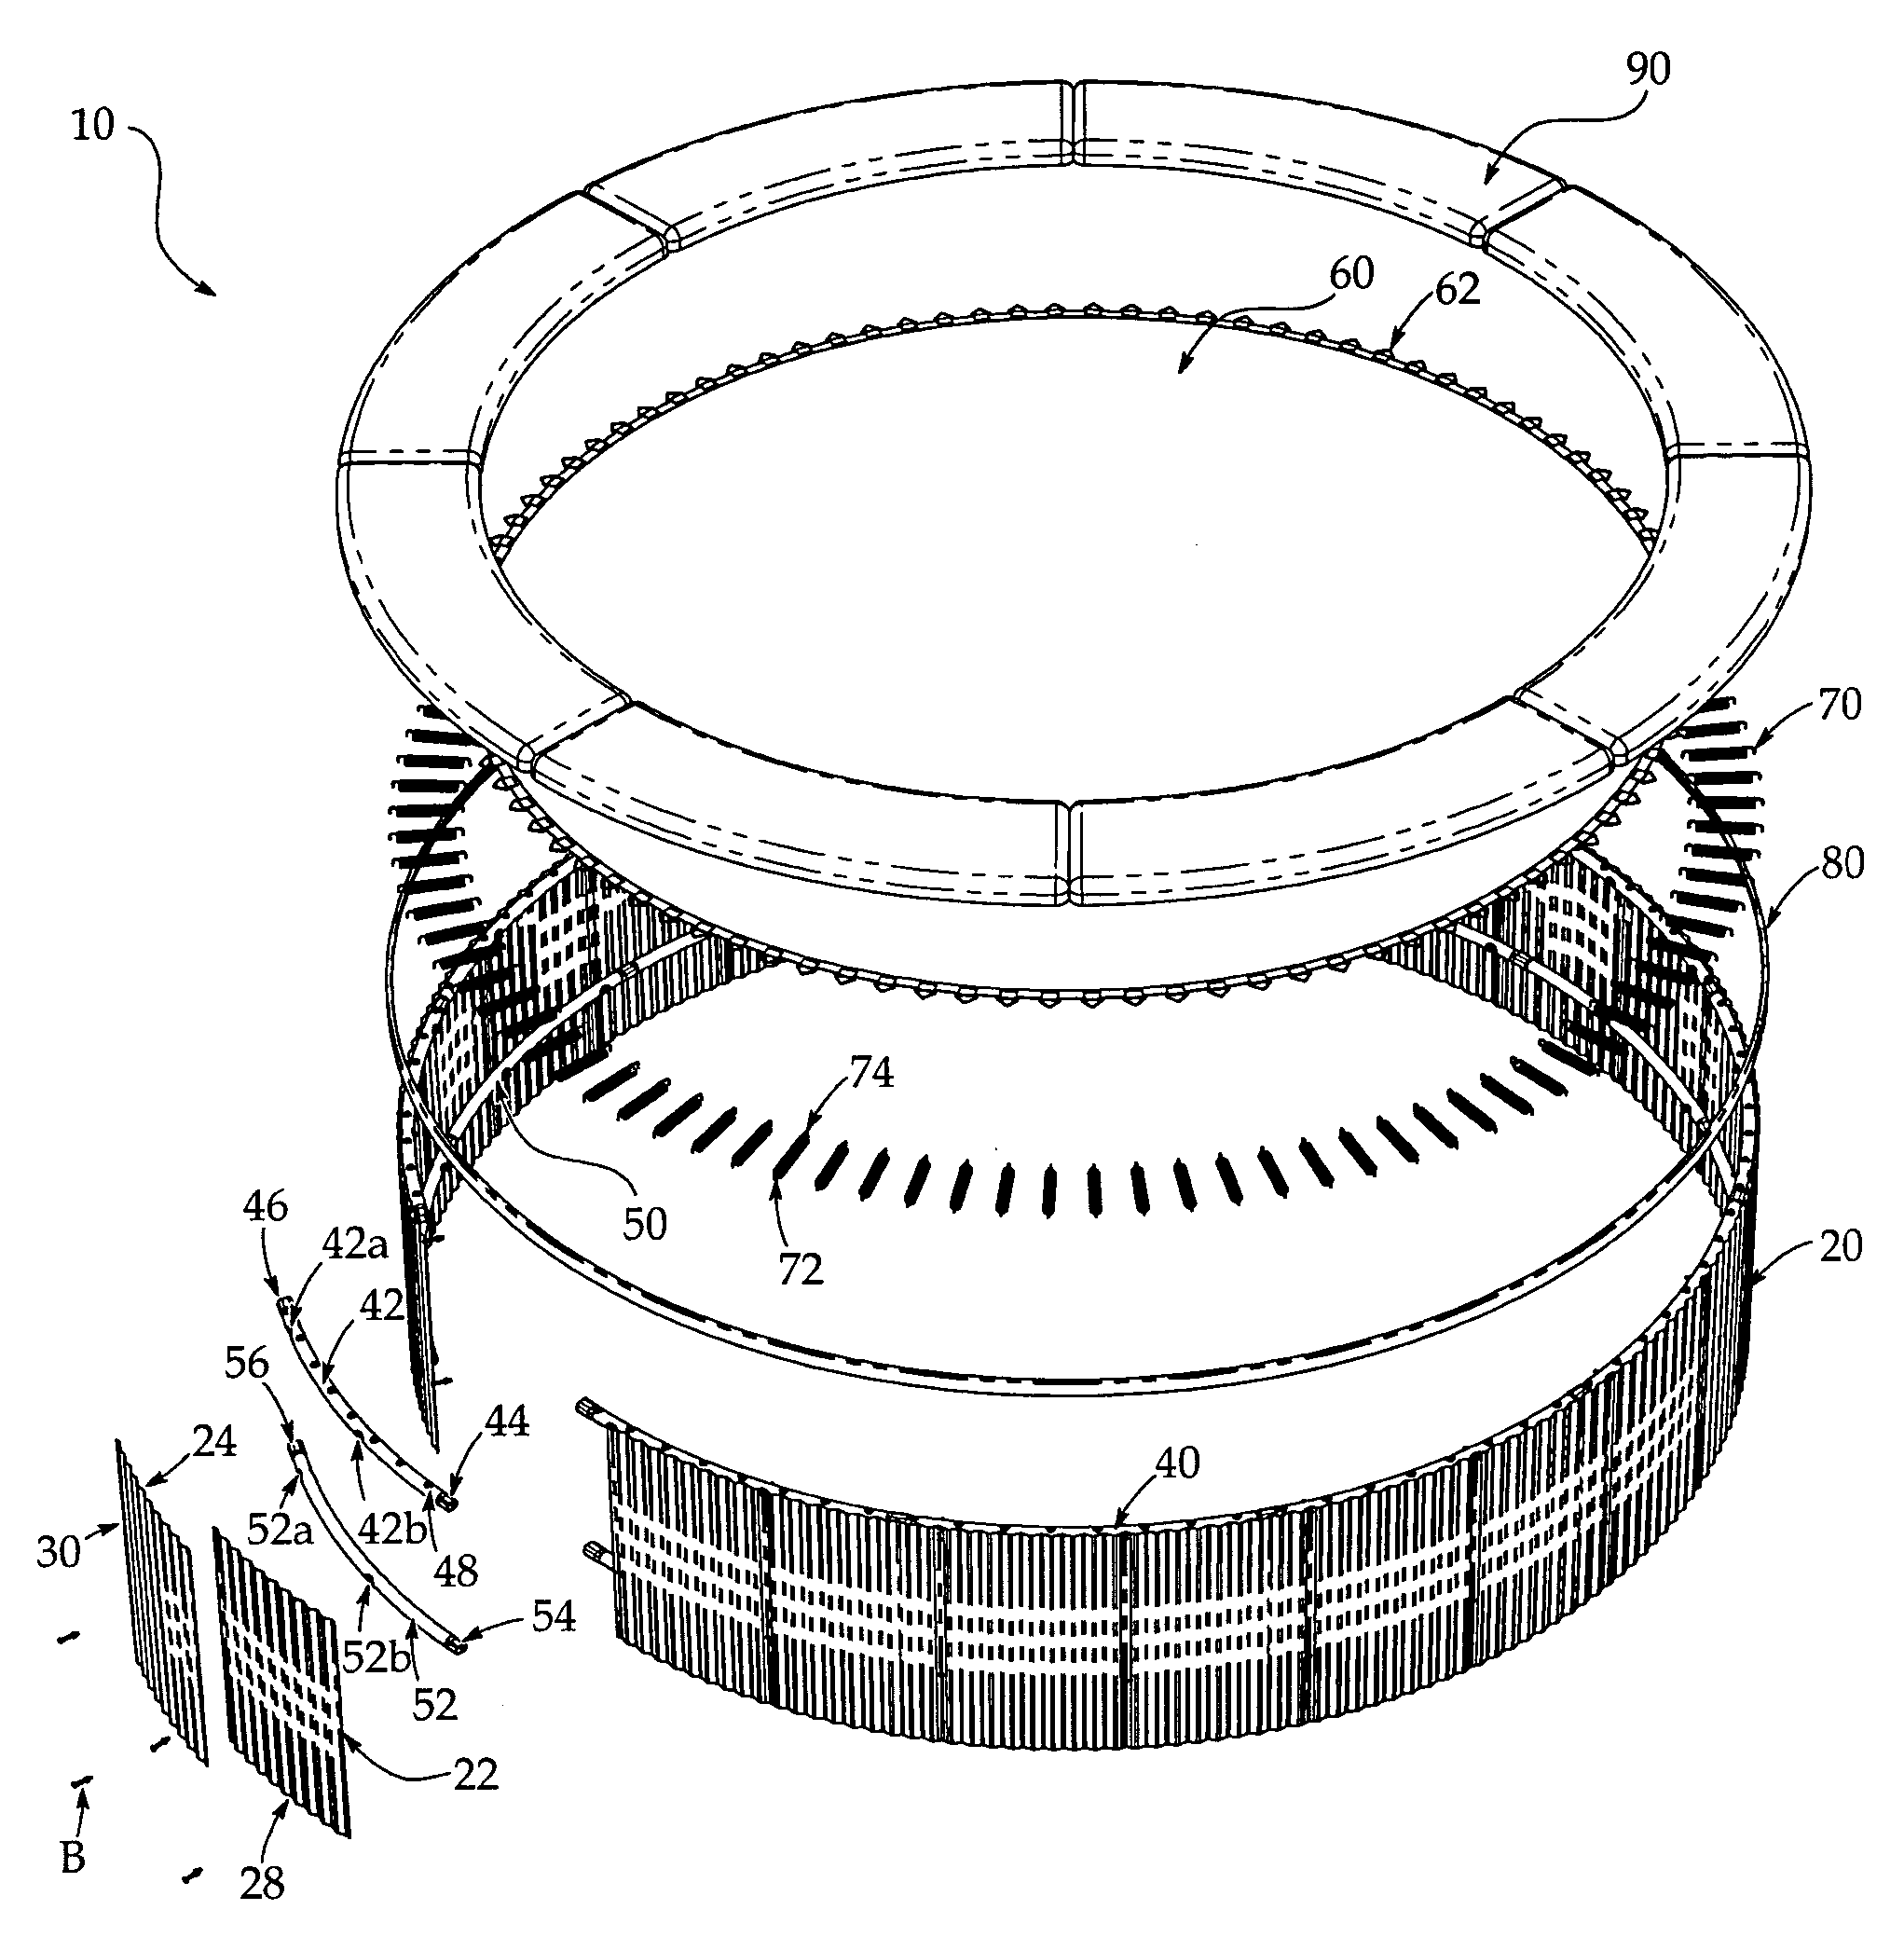 In-ground trampoline and method of installation therefor